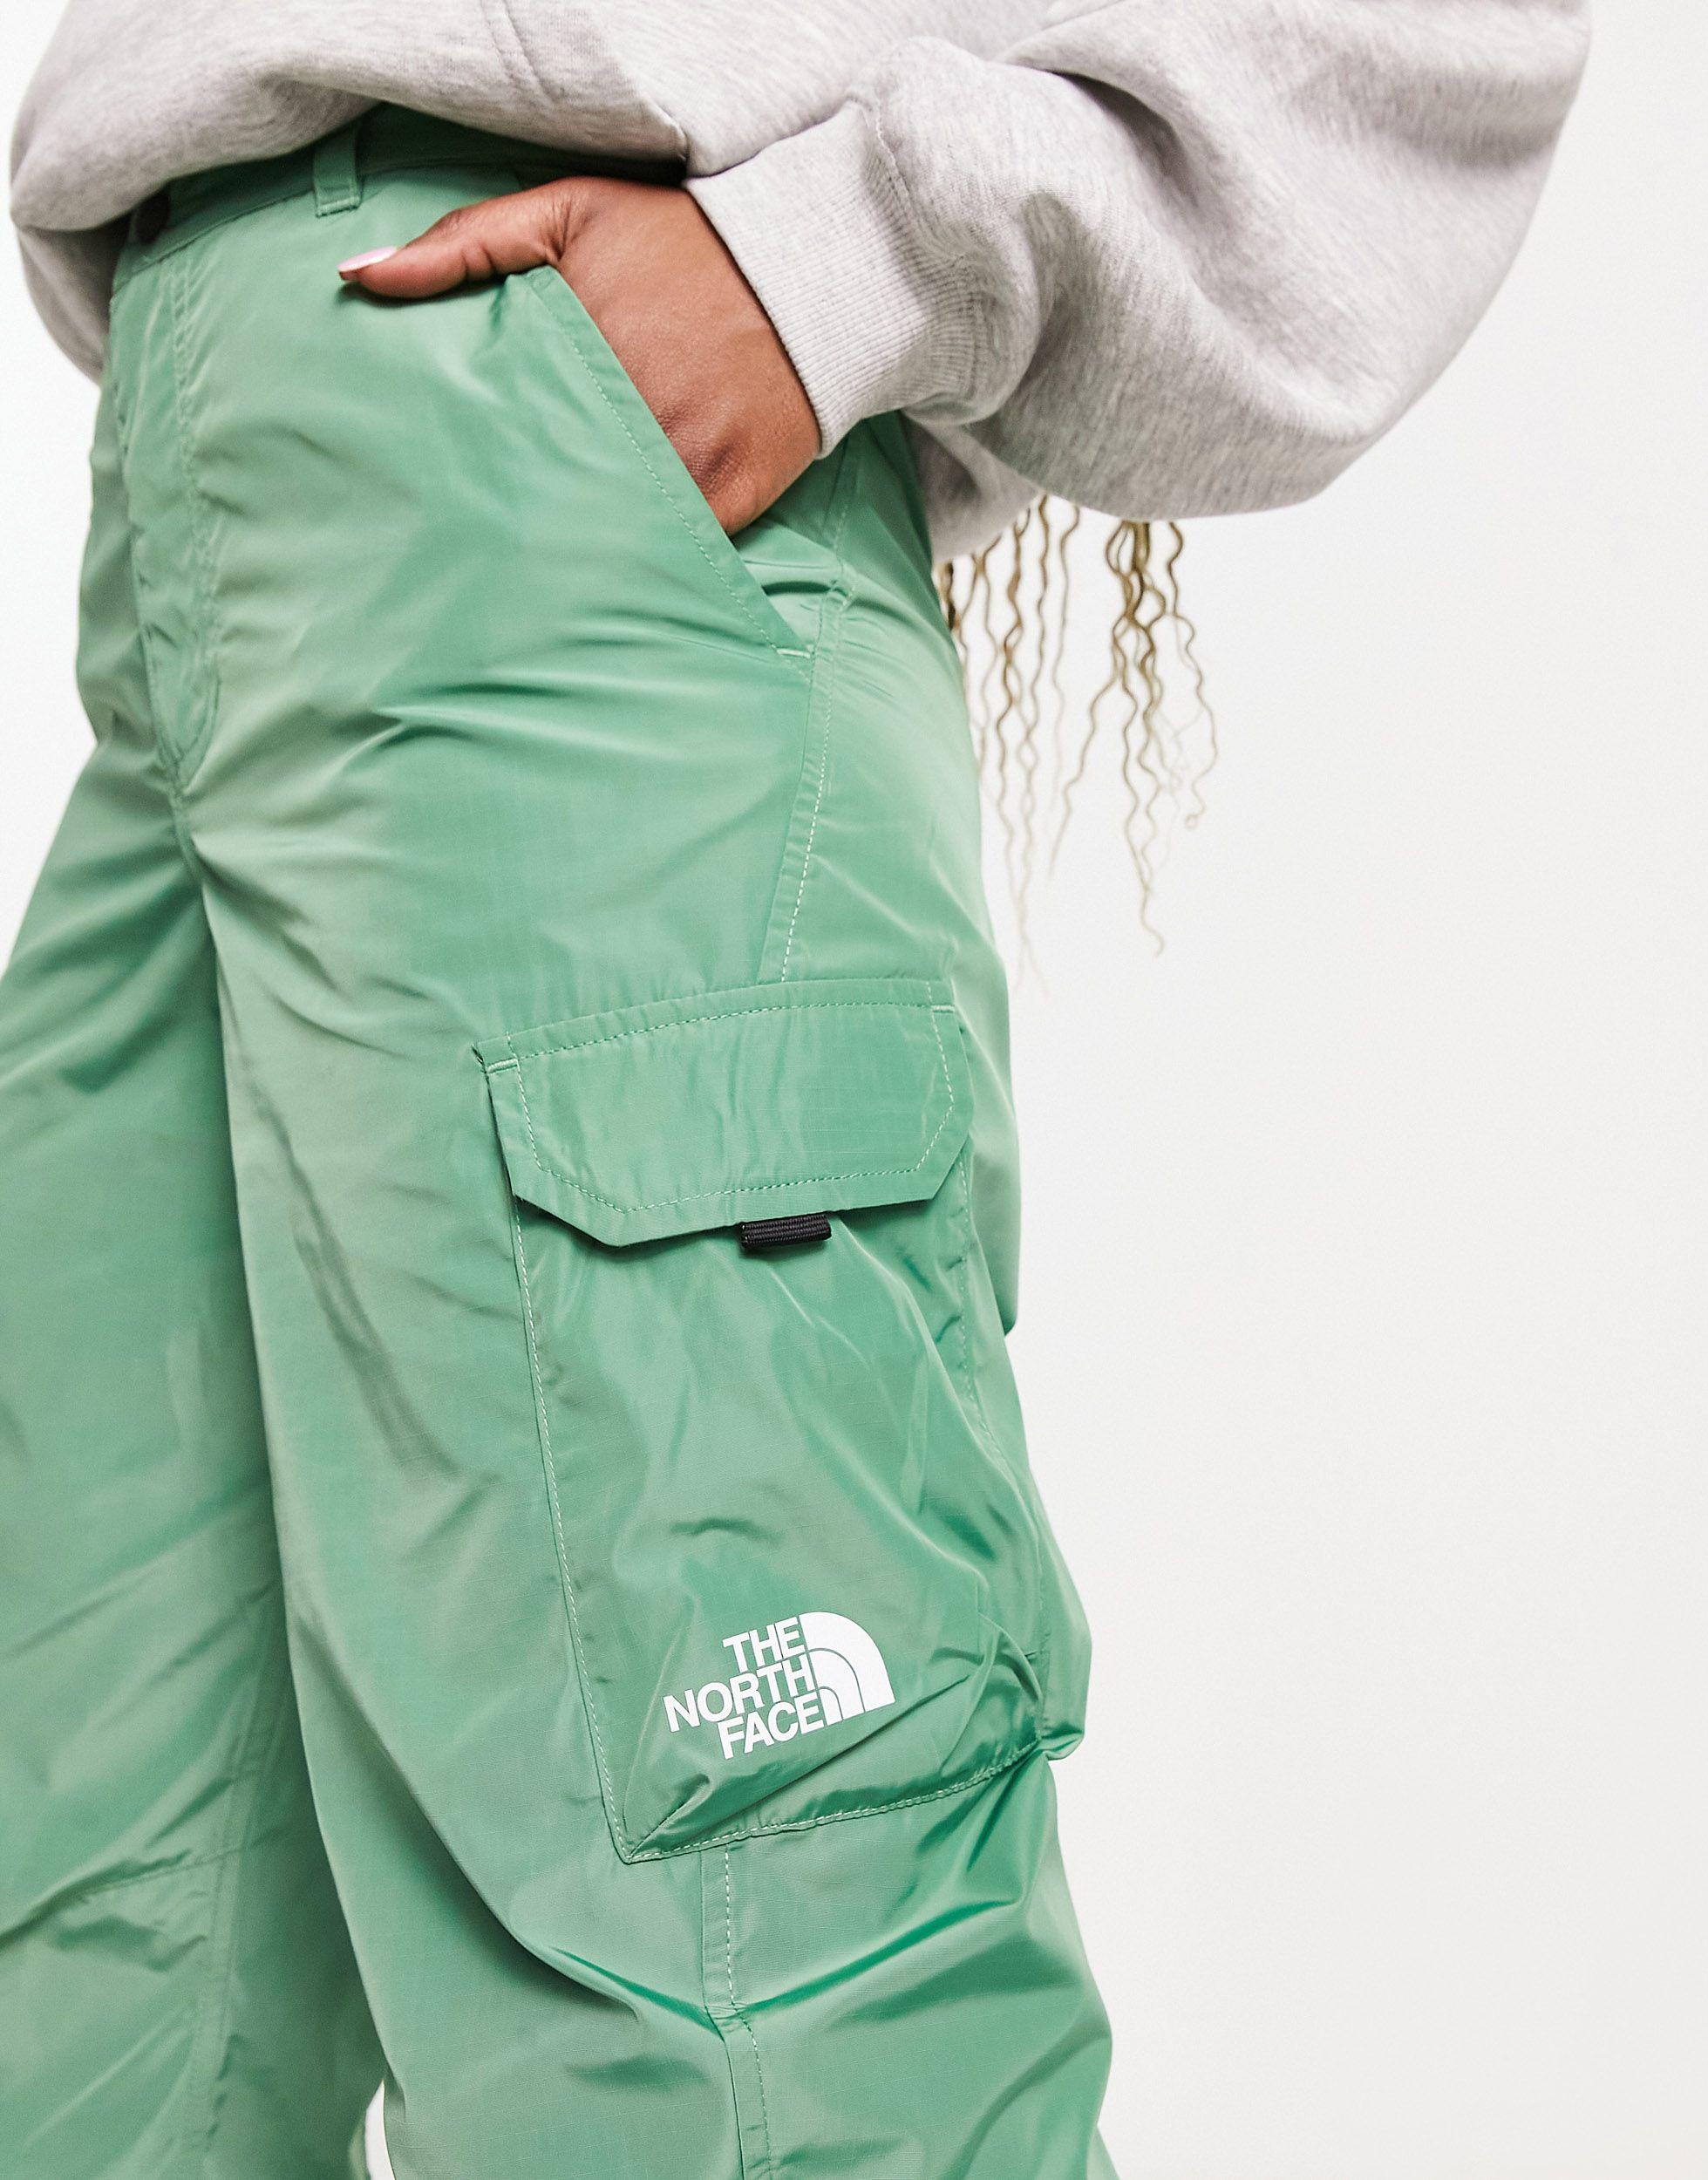 The North Face Alrescha high rise cargo pants in stone Exclusive